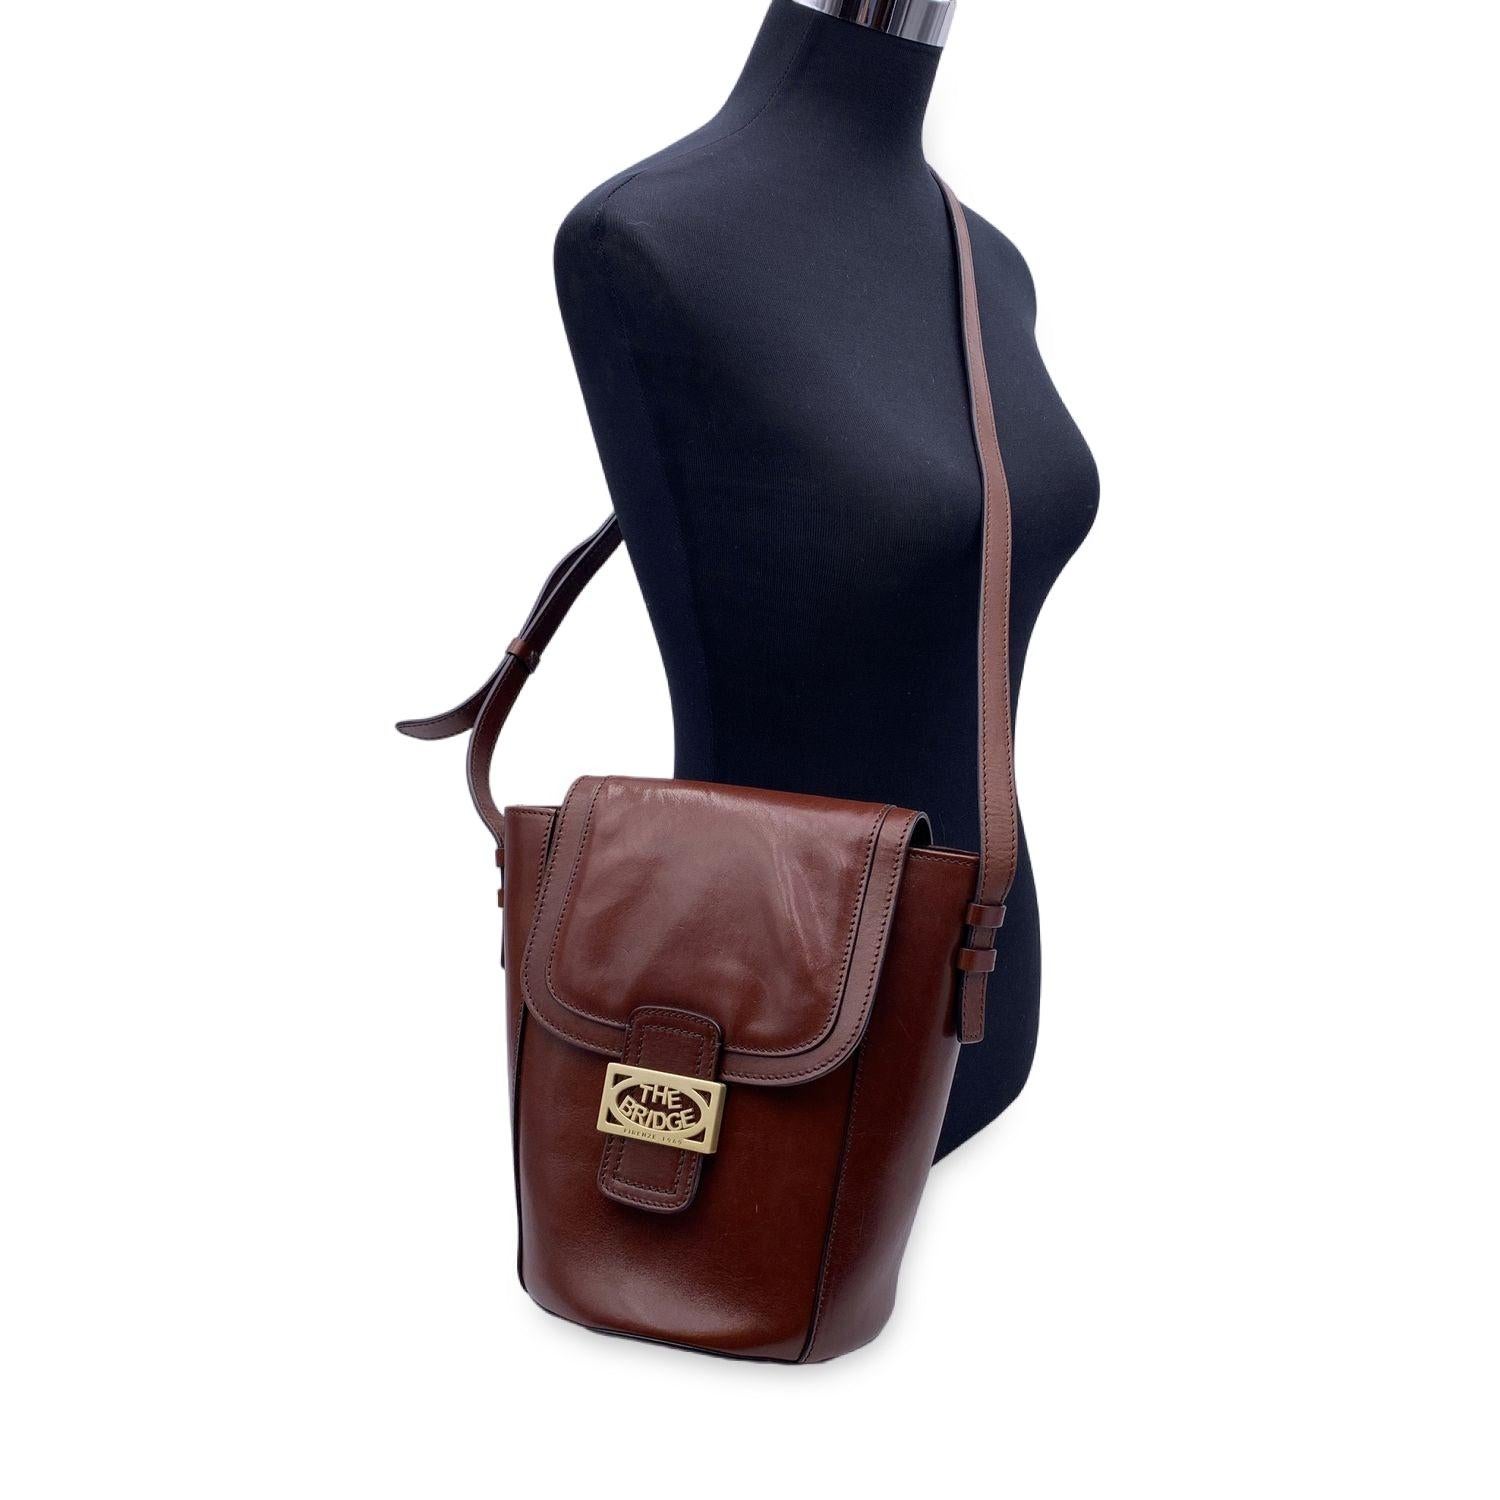 Vintage the Bridge bucket bag crafted in brown leather. Flap with magnetic button closure. Brown fabric lining. 1 zip pocket nside. Gold metal The Bridge logo on the front. Adjustable shoulder strap. The Bridge tag inside Condition A - EXCELLENT